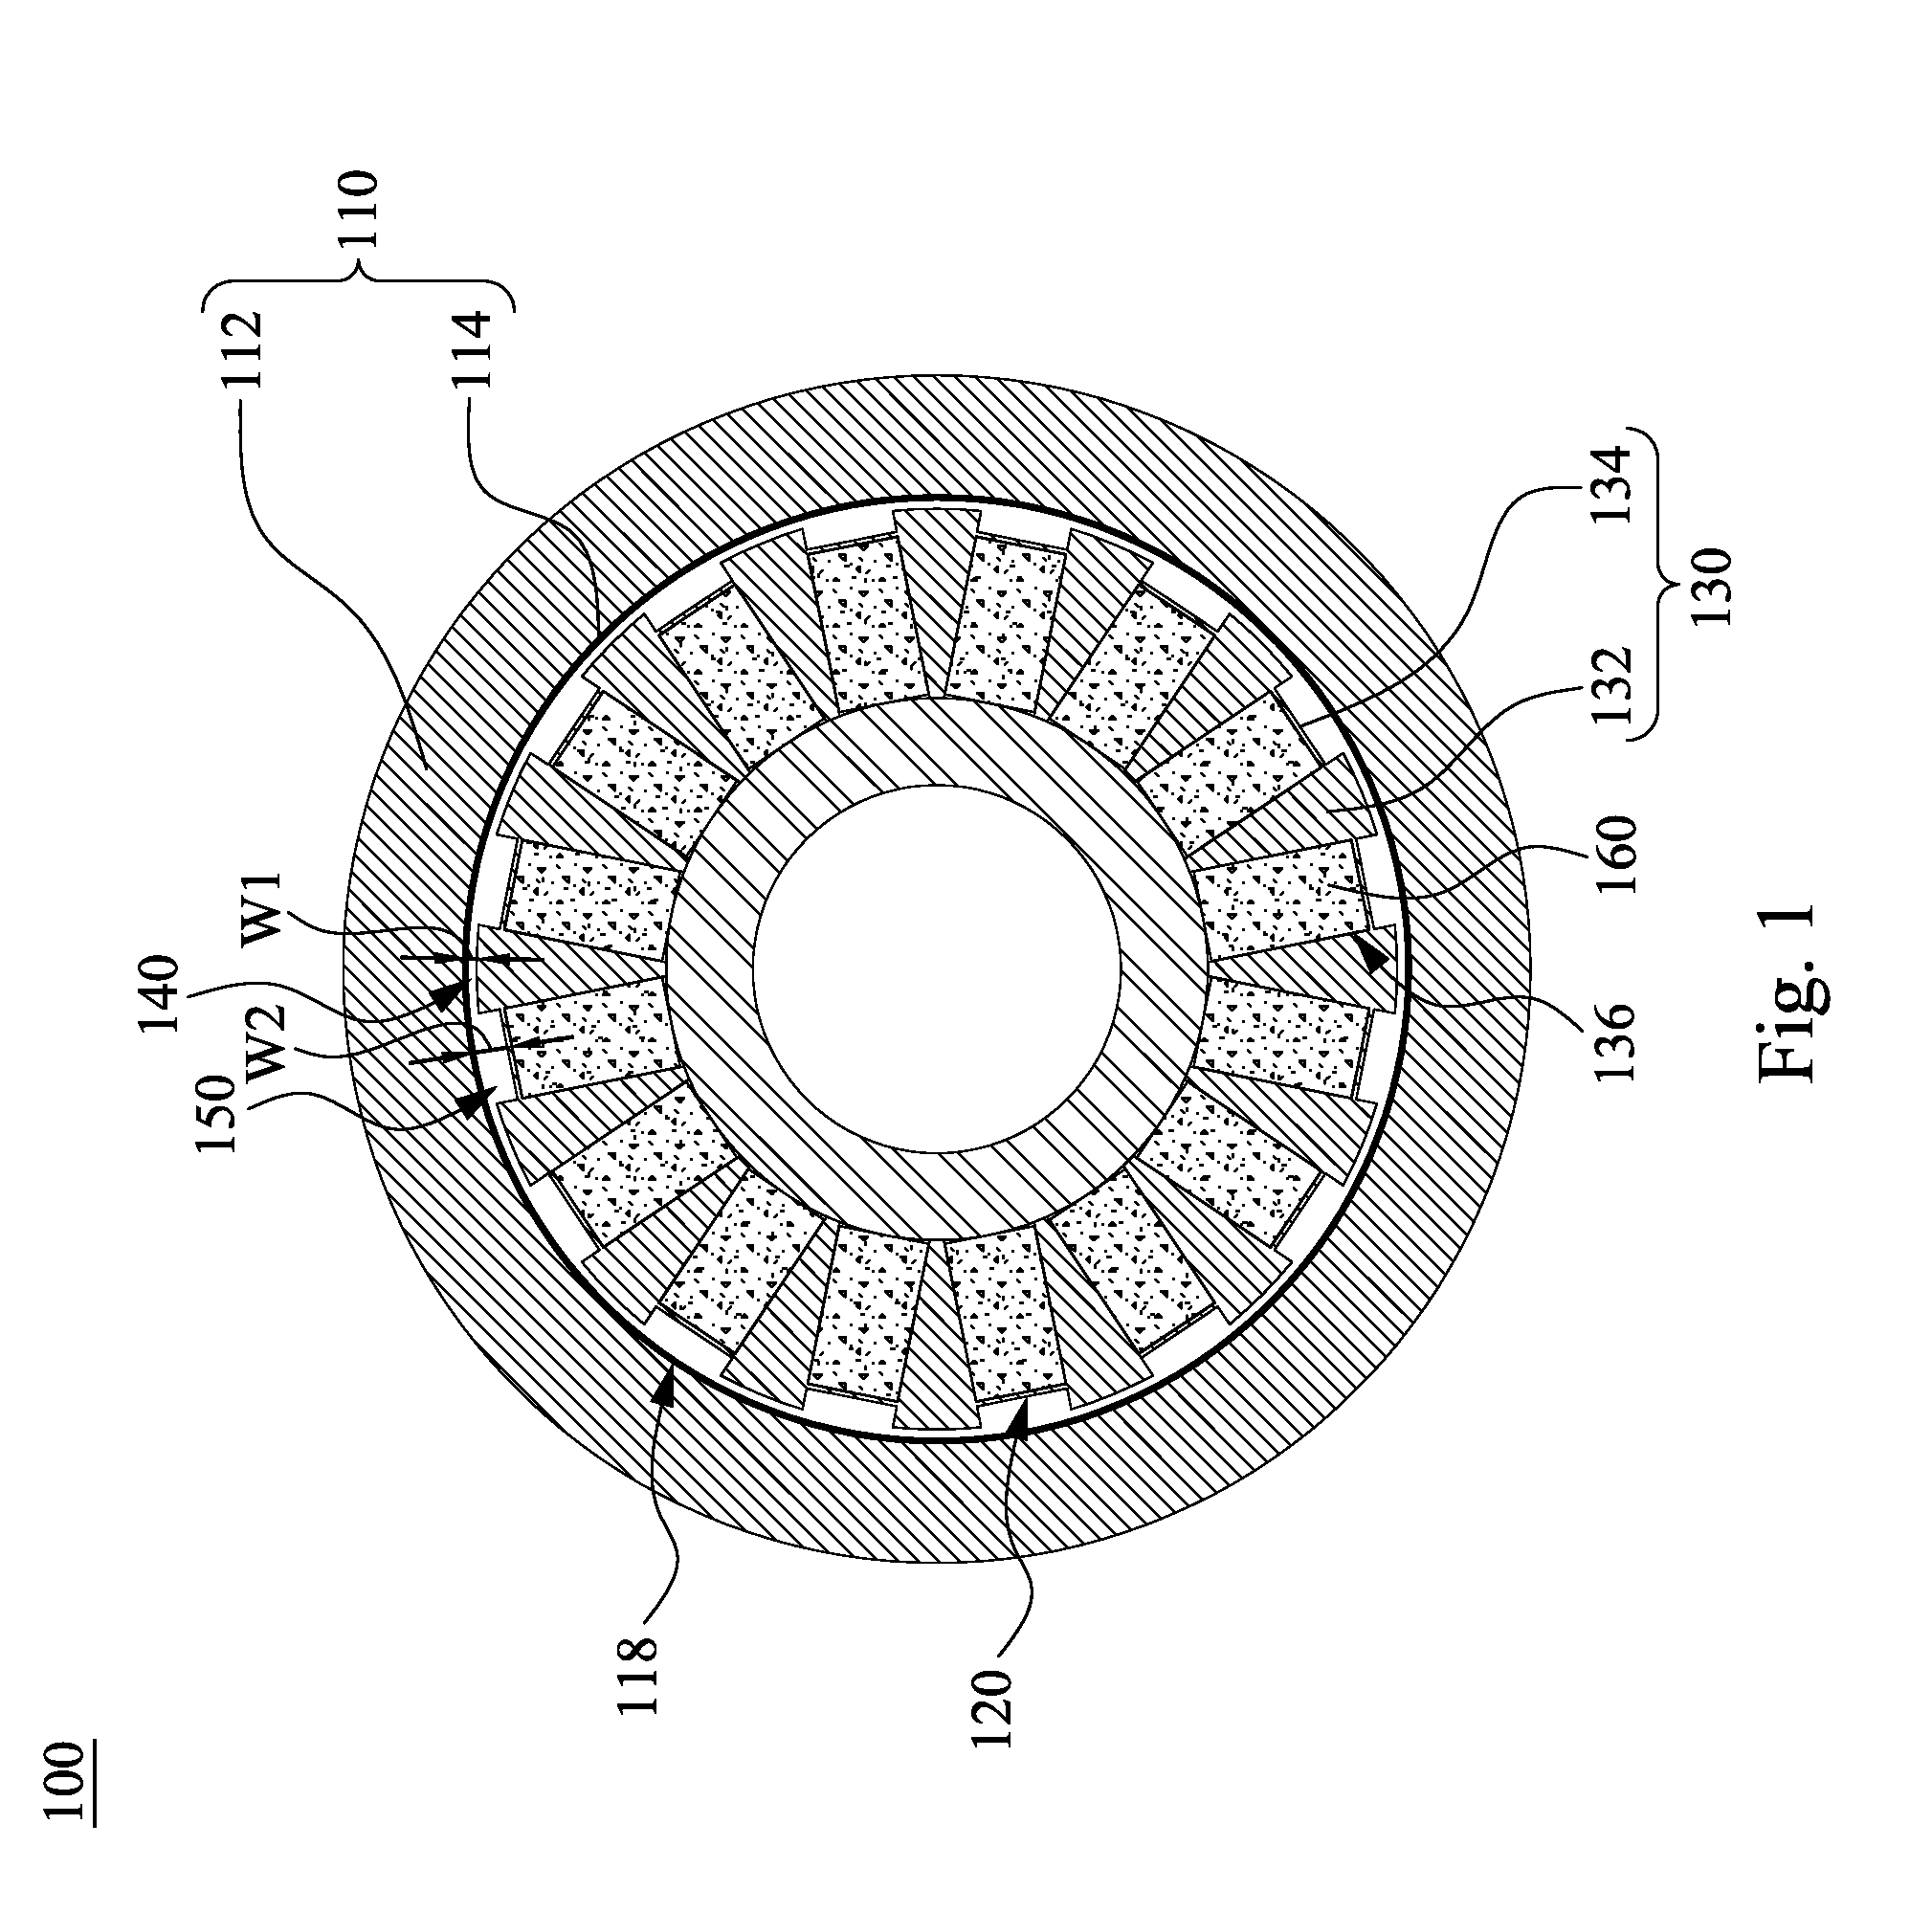 Permanent magnetic coupling device